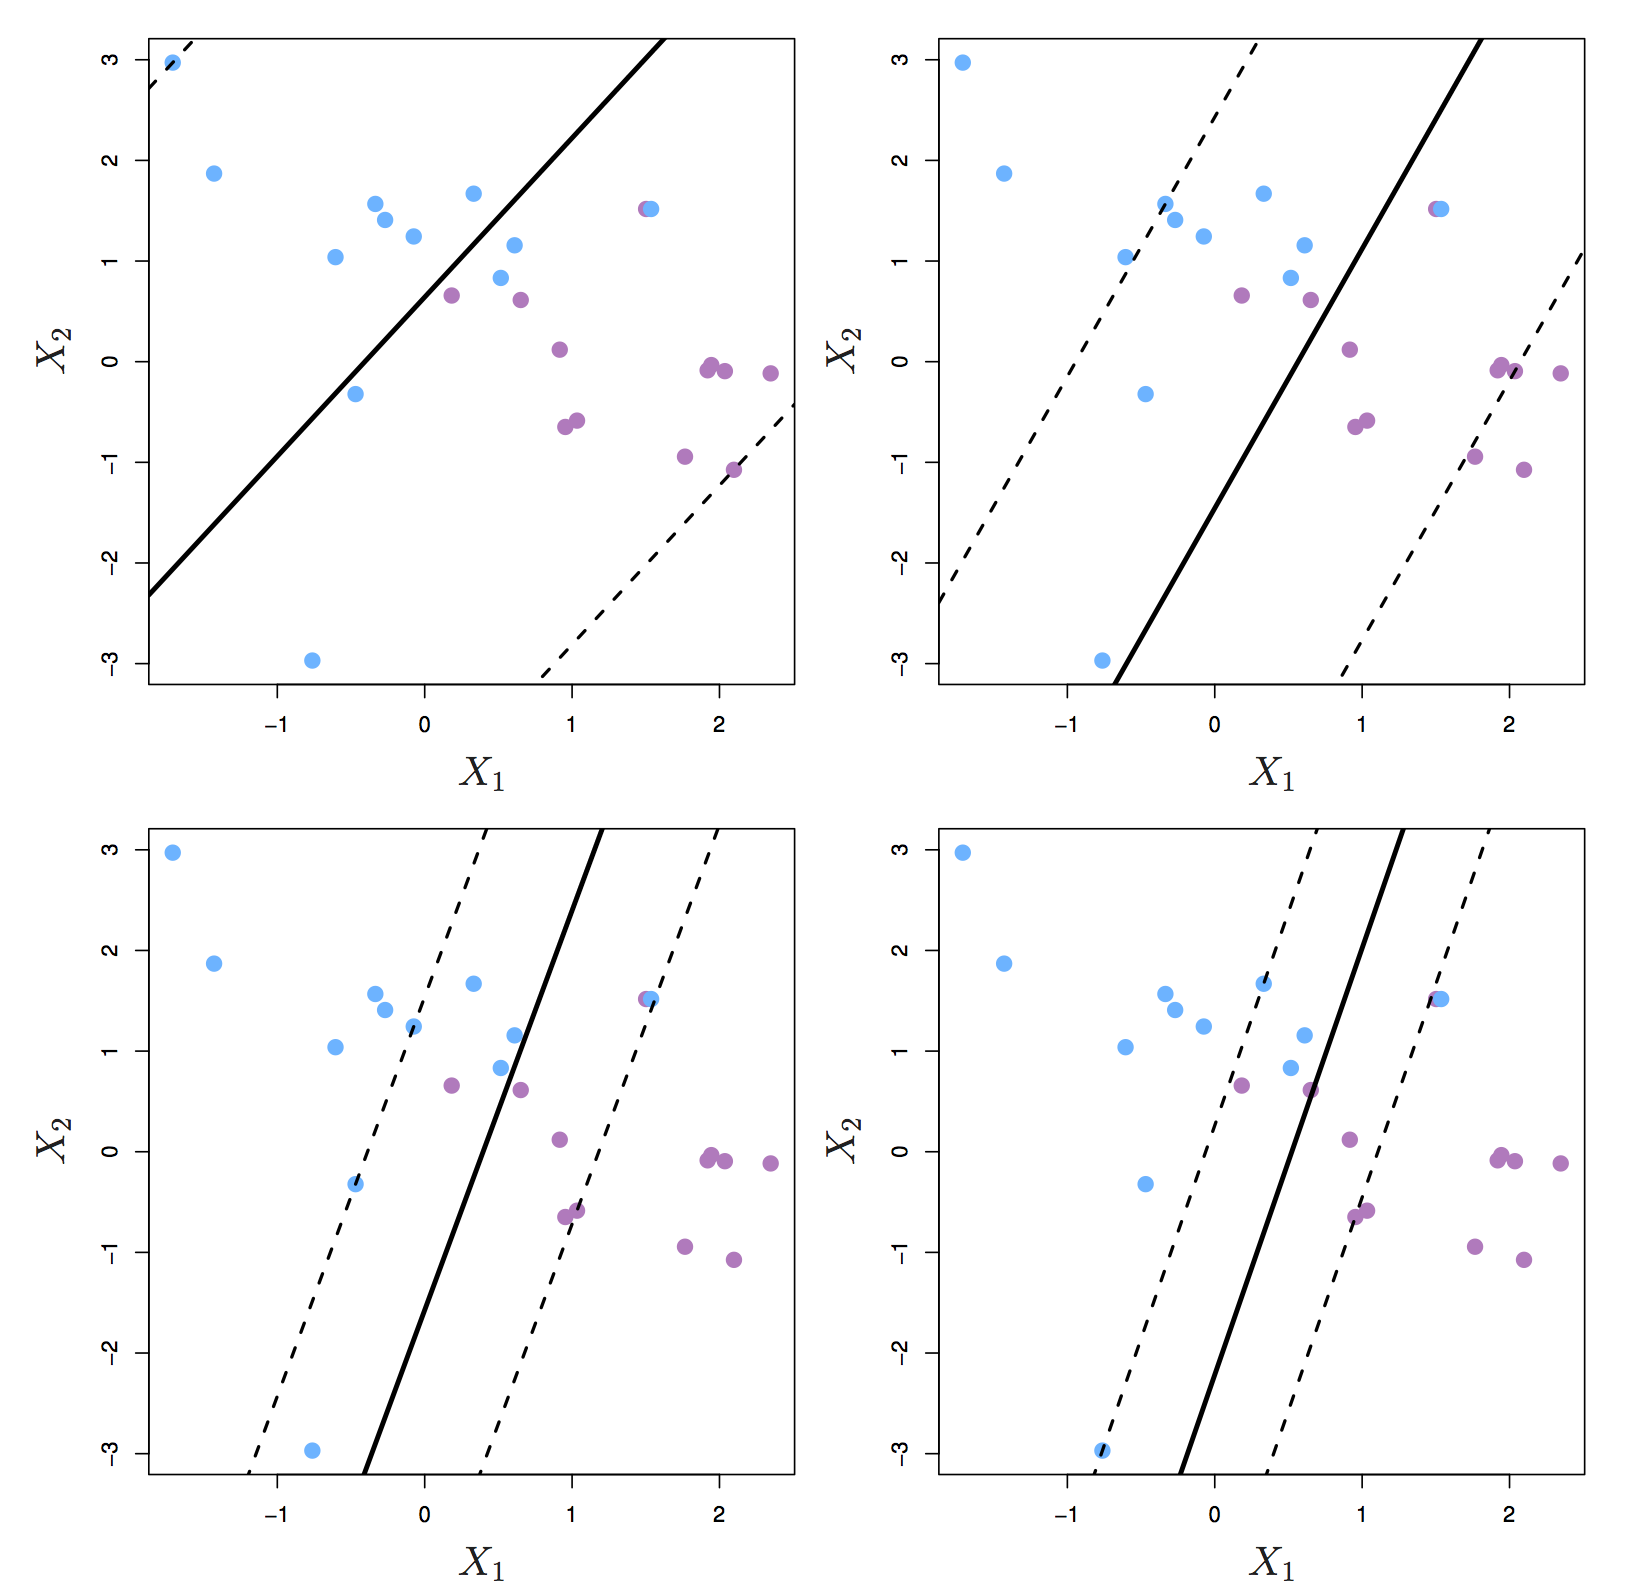 Margin of a support vector classifier changing with tuning parameter C. Largest value of C was used in the top left panel, and smaller values in the top right, bottom left and bottom right panels. Source: http://www-bcf.usc.edu/~gareth/ISL/